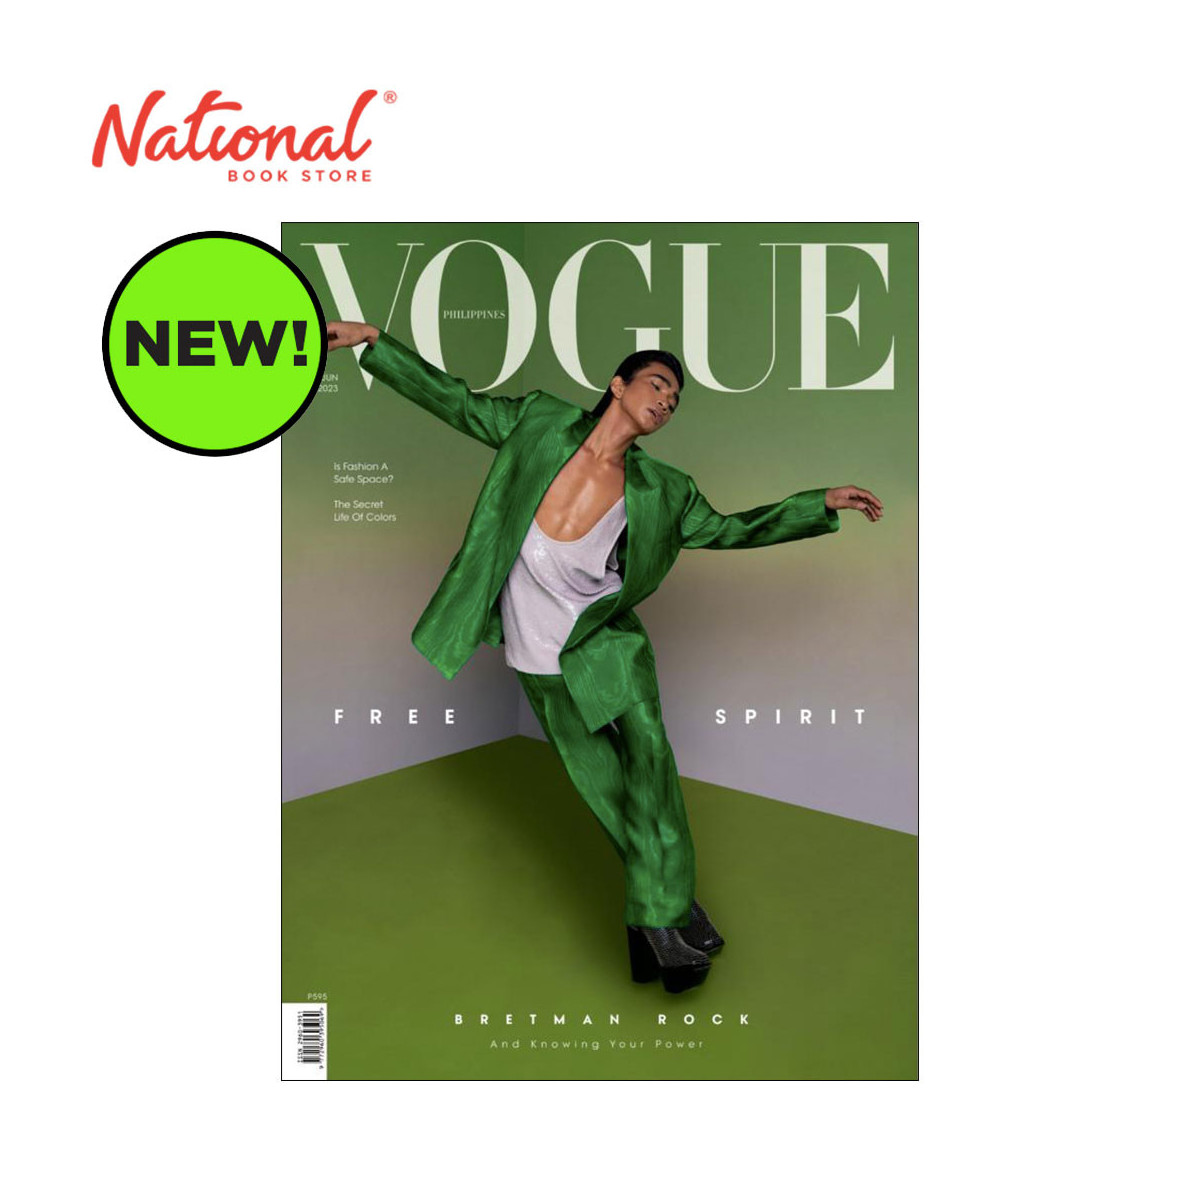 Bretman Rock covers Vogue Philippines for Pride